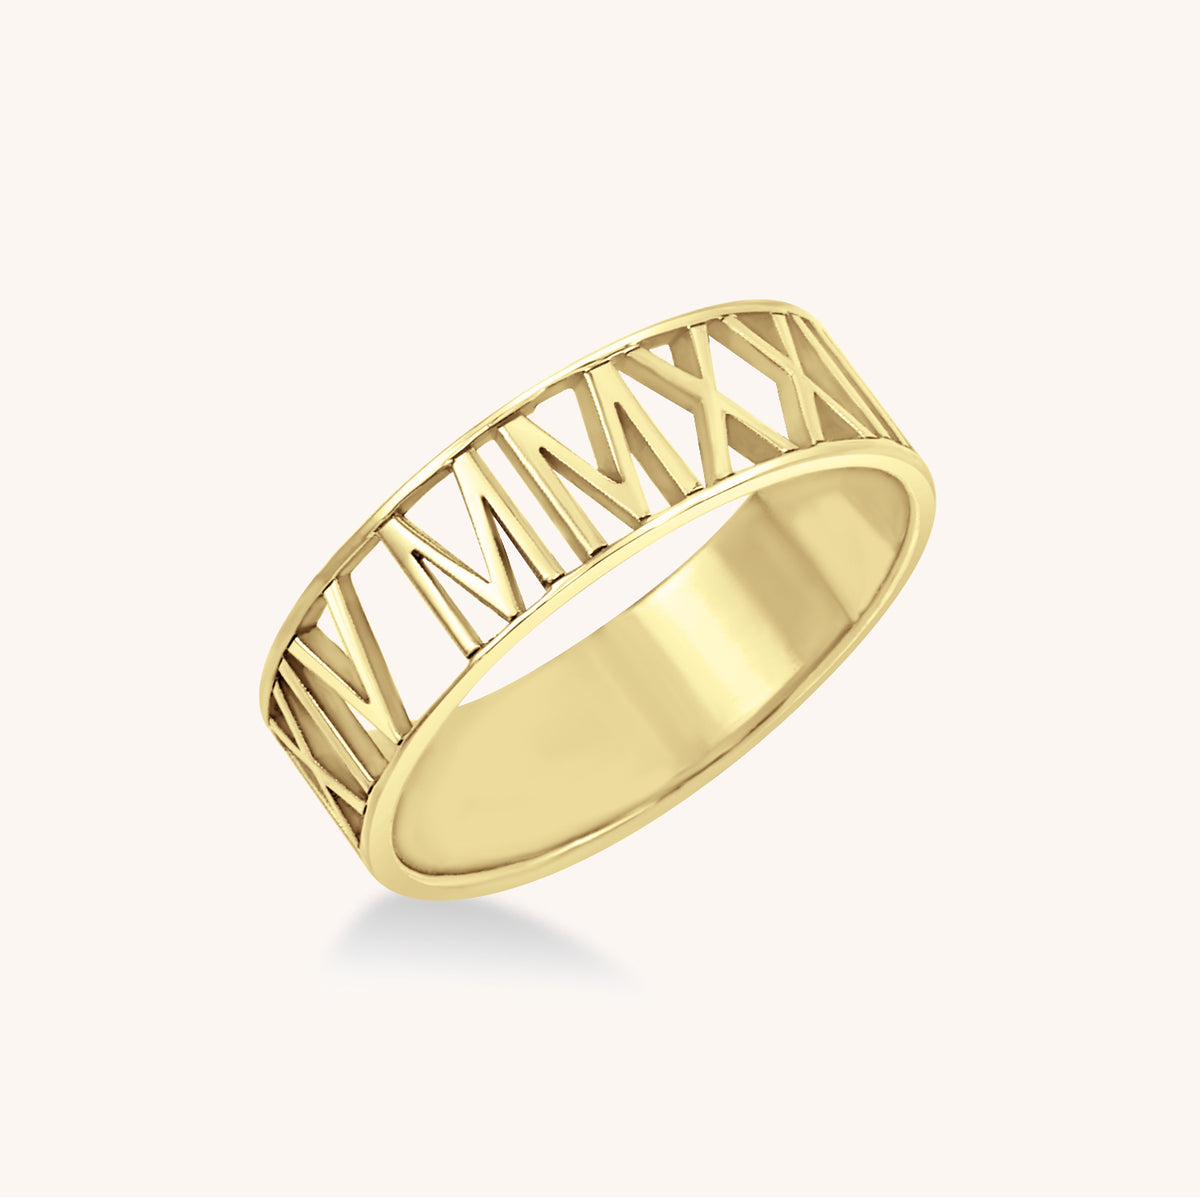 1922 Roman Numeral Date Ring